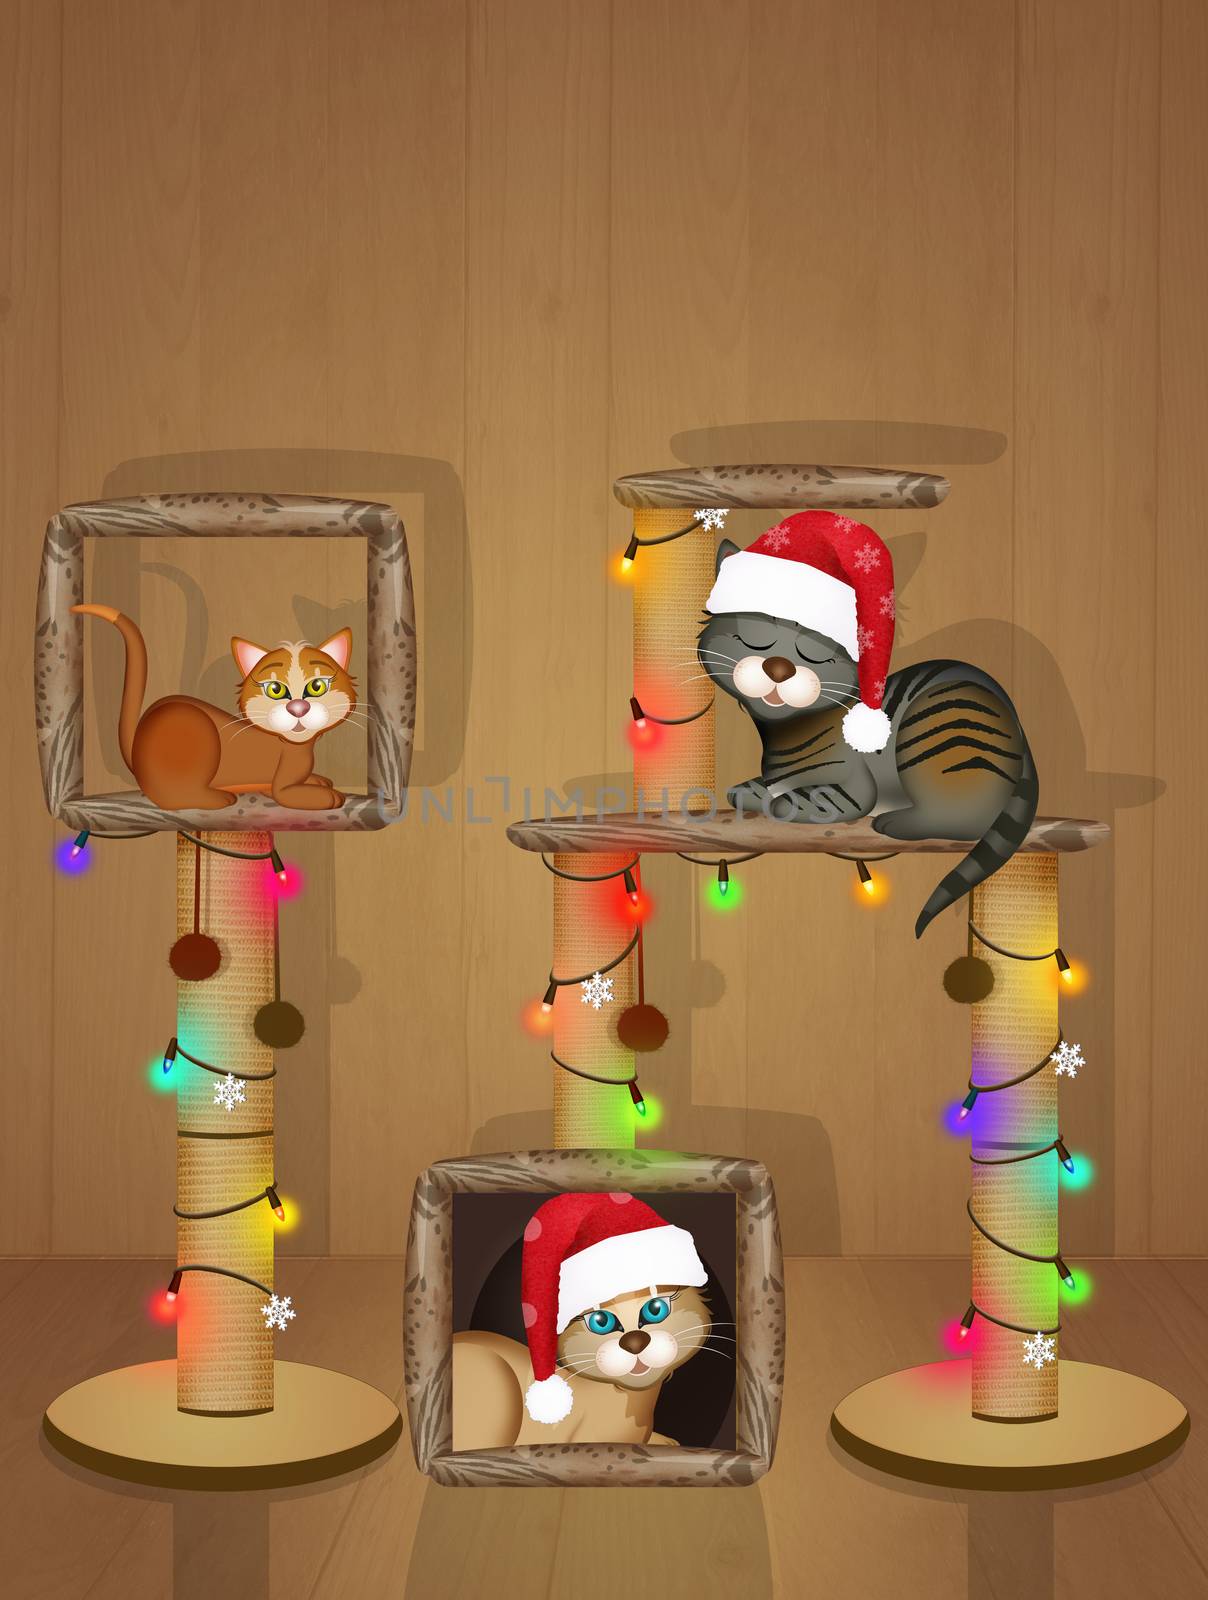 cats and the scratching post decorated for Christmas by adrenalina